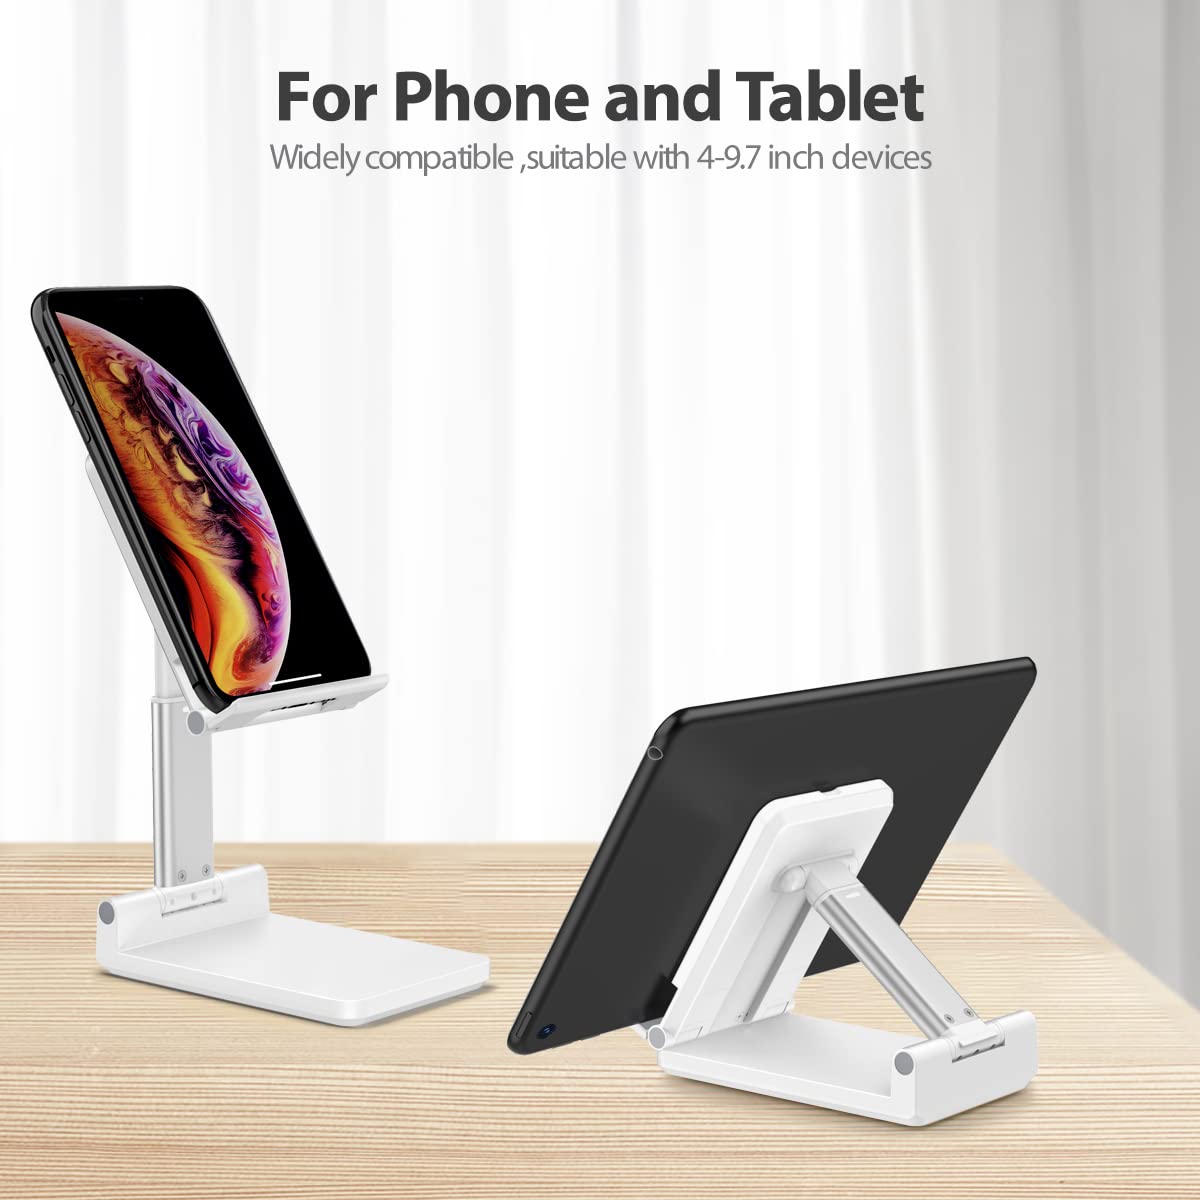 iPhone and Tablet Kept on Laza ABS Plastic Mobile Stand by Urban Kings Store